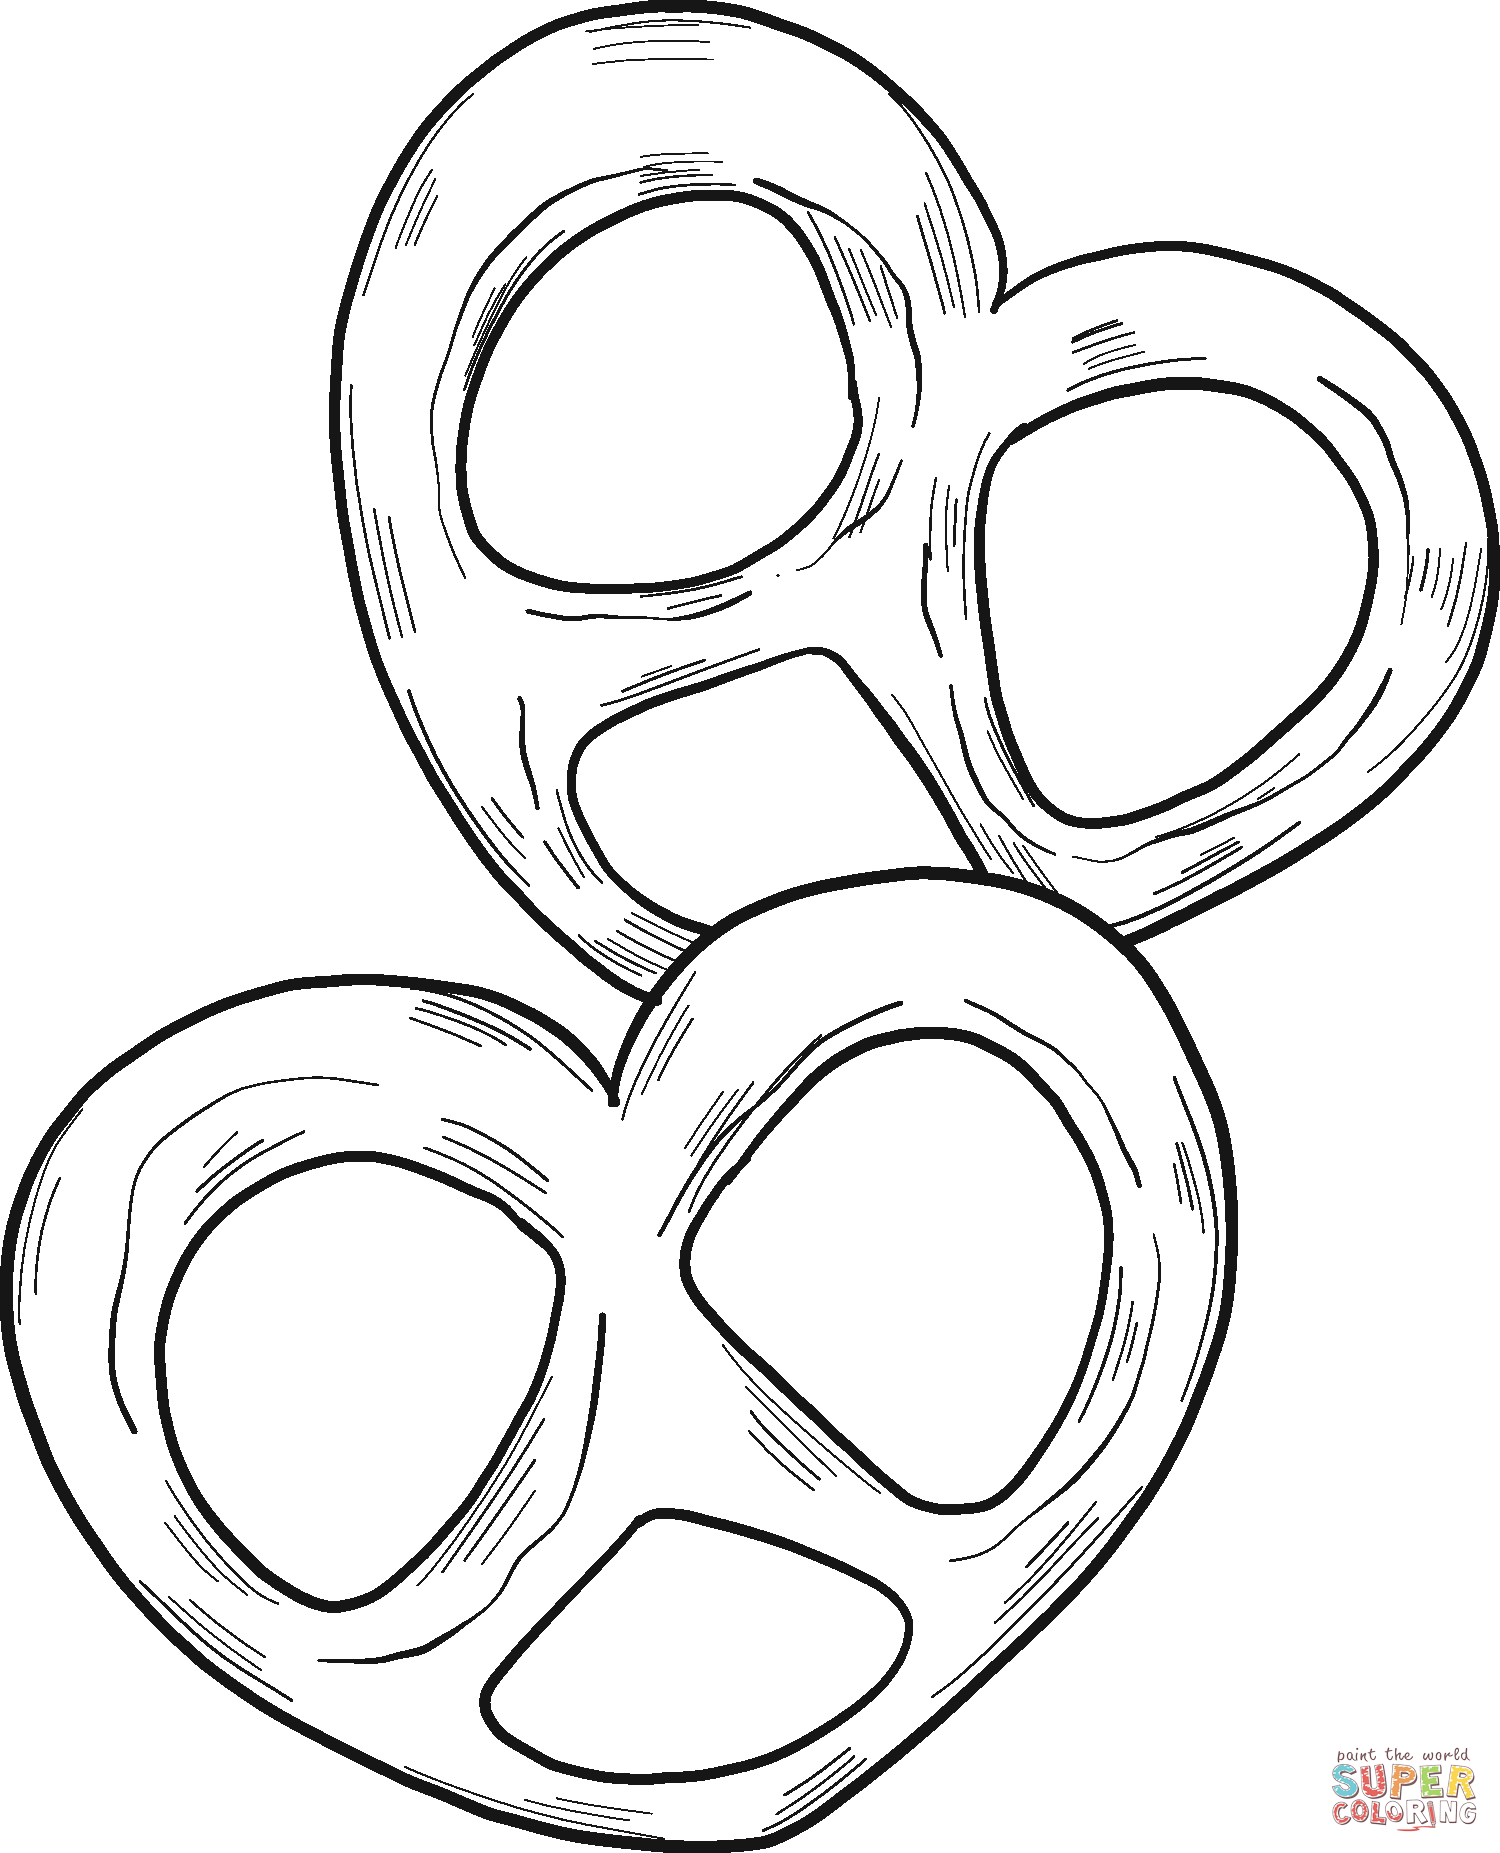 Pretzels coloring page | Free Printable Coloring Pages